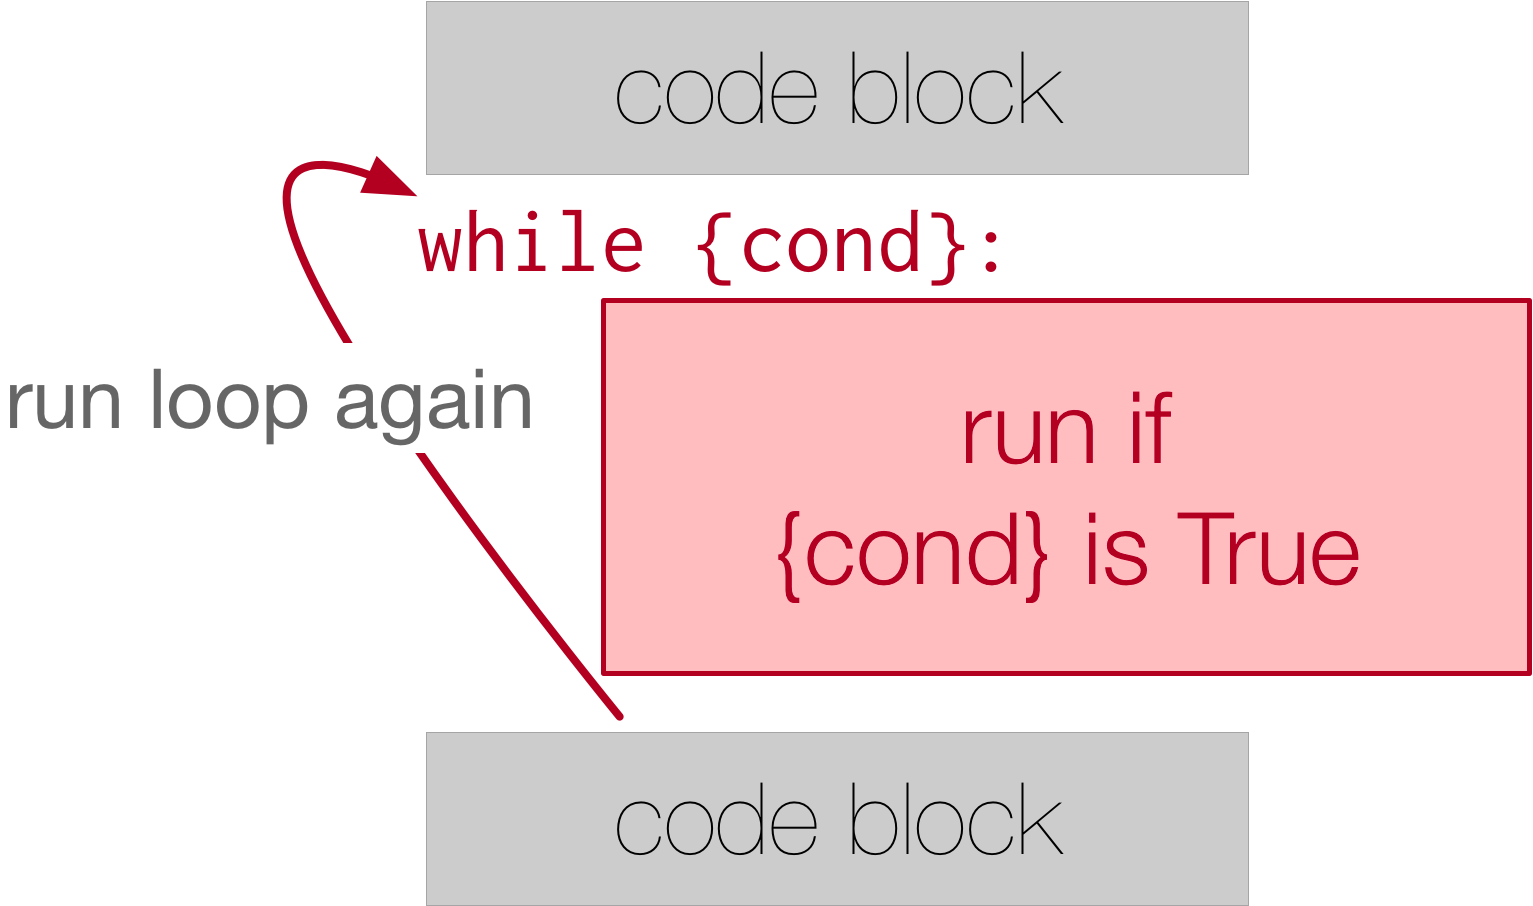 image showing a rectangle with "code block" written on it on top. Then, text that read "while {condition}": followed by an indented block with "run if {condition} is True" written on it. An arrow points from the bottom of the indented block to the top of the while loop and says "run loop again". At the bottom of the image is an unindented block that says the phrase "code block."